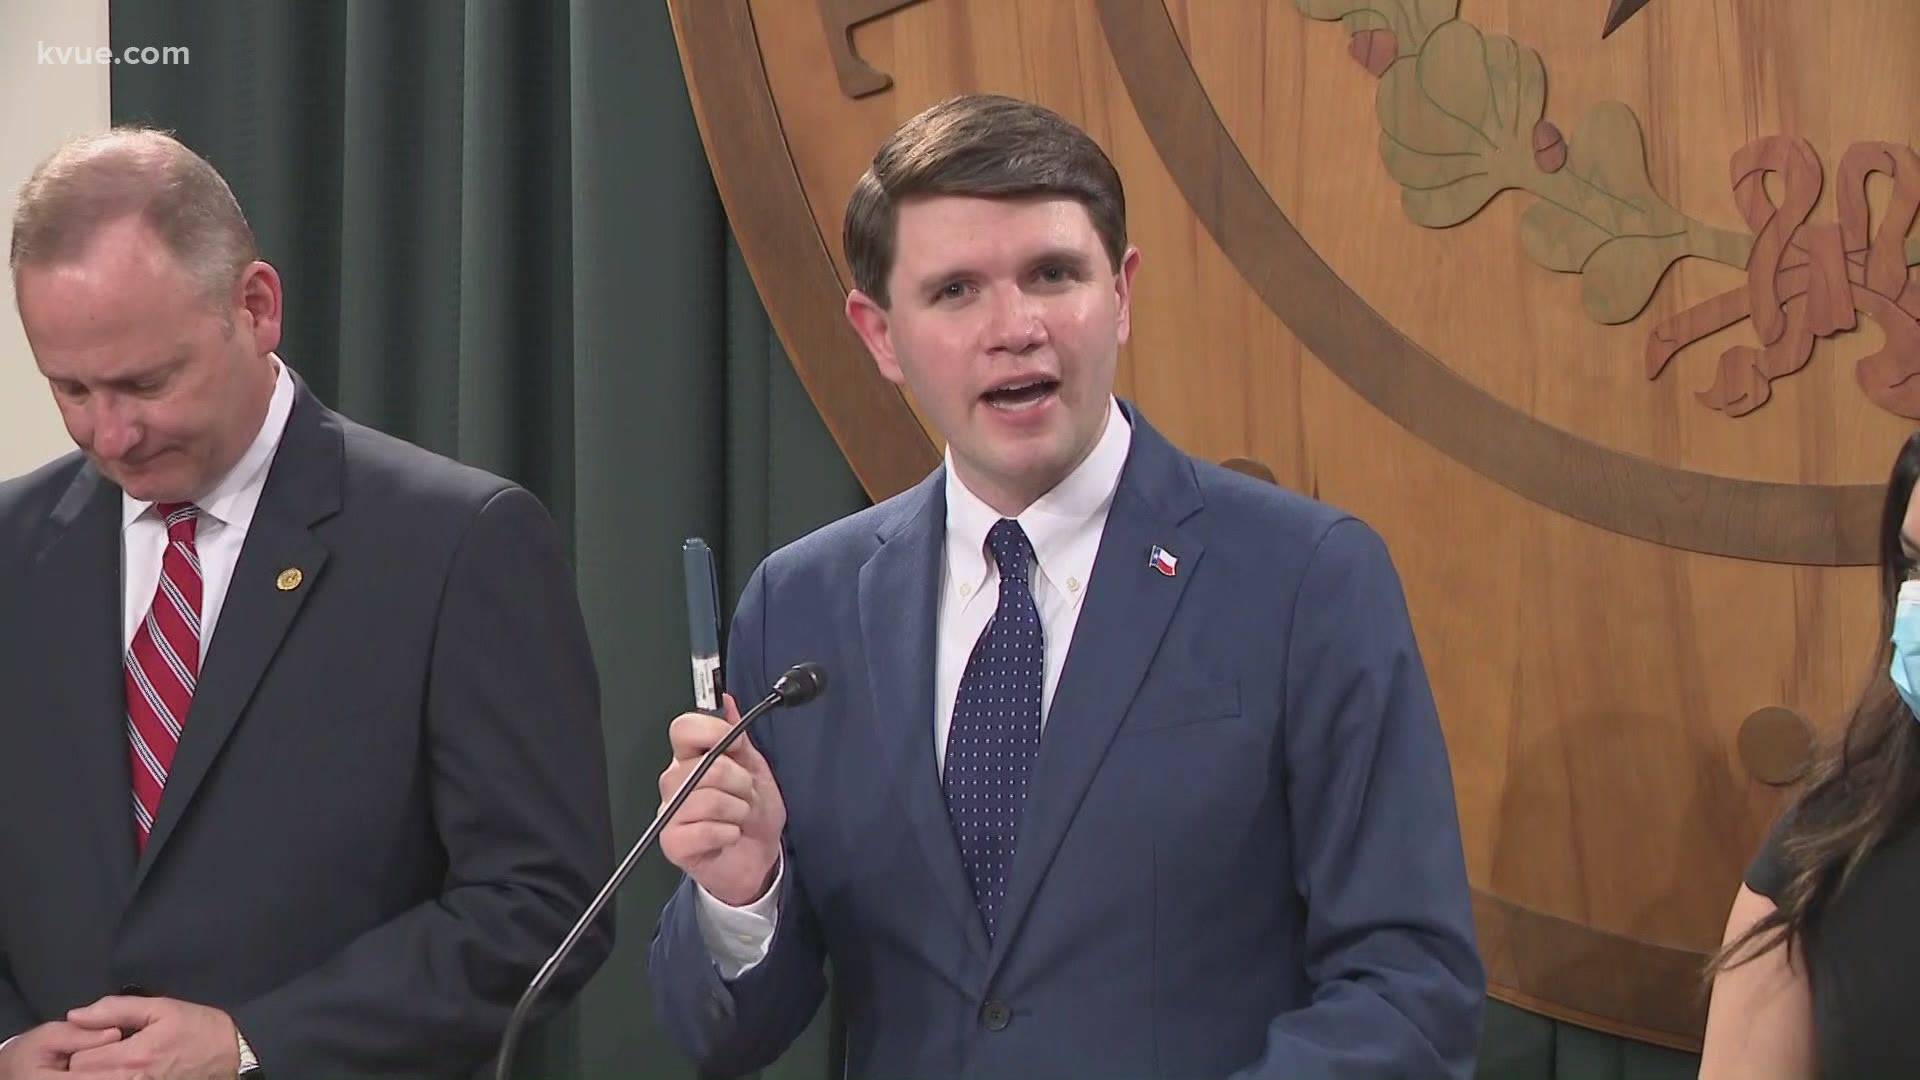 Rep. James Talarico of Williamson County is pushing to put a cap on insulin prices. Texas House Bill 40 would limit the cost of a 30-day supply of insulin to $50.